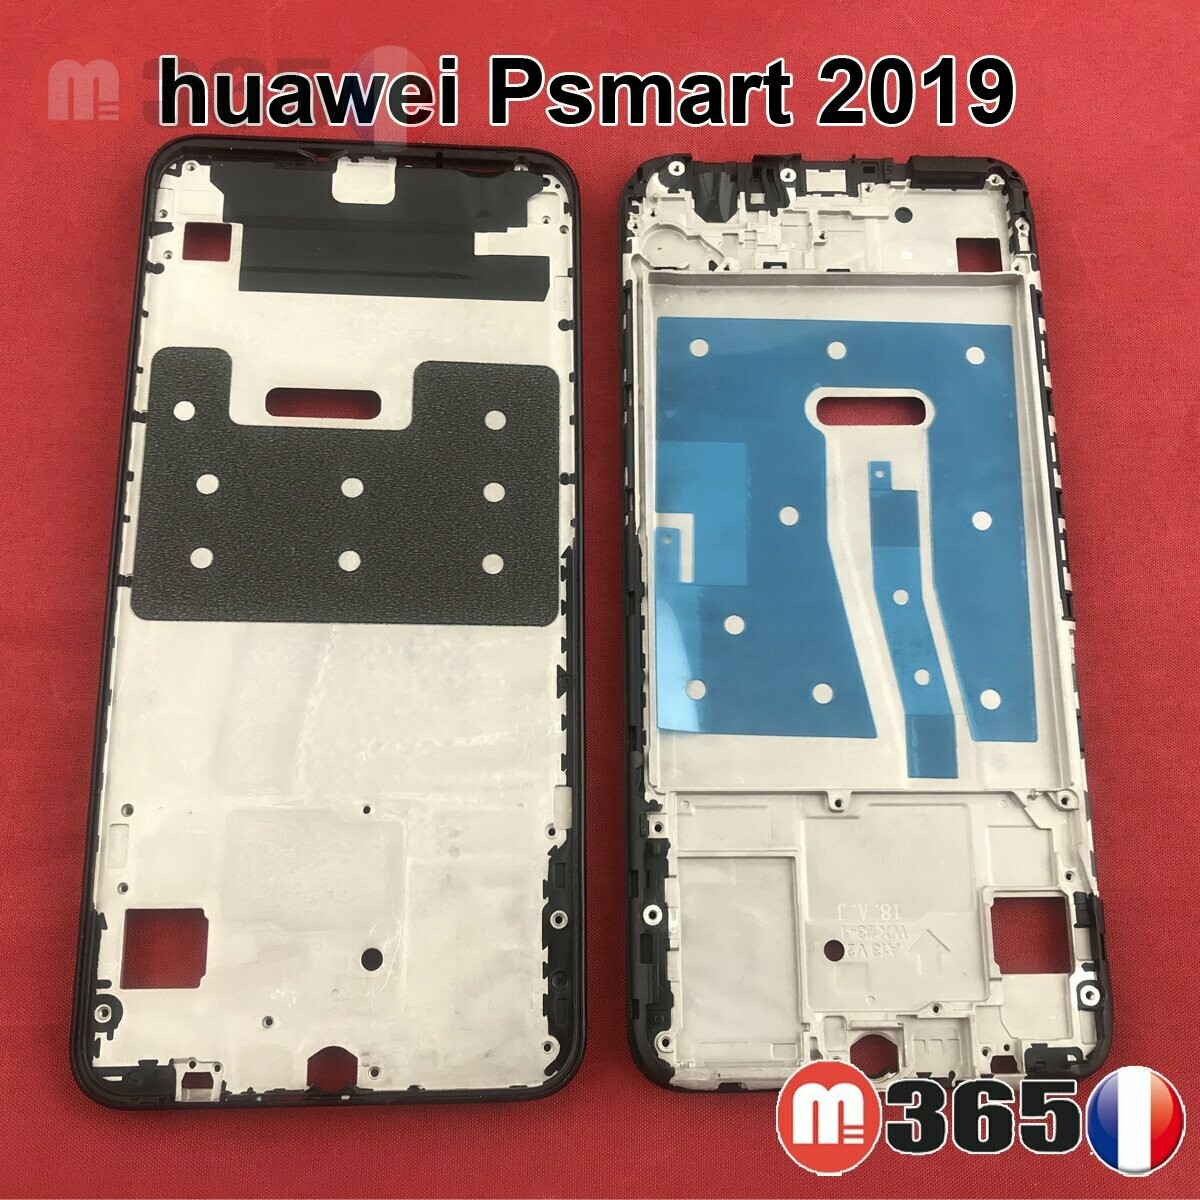 HUAWEI Psmart 2019 CHASSIS INTERMEDIAIRE